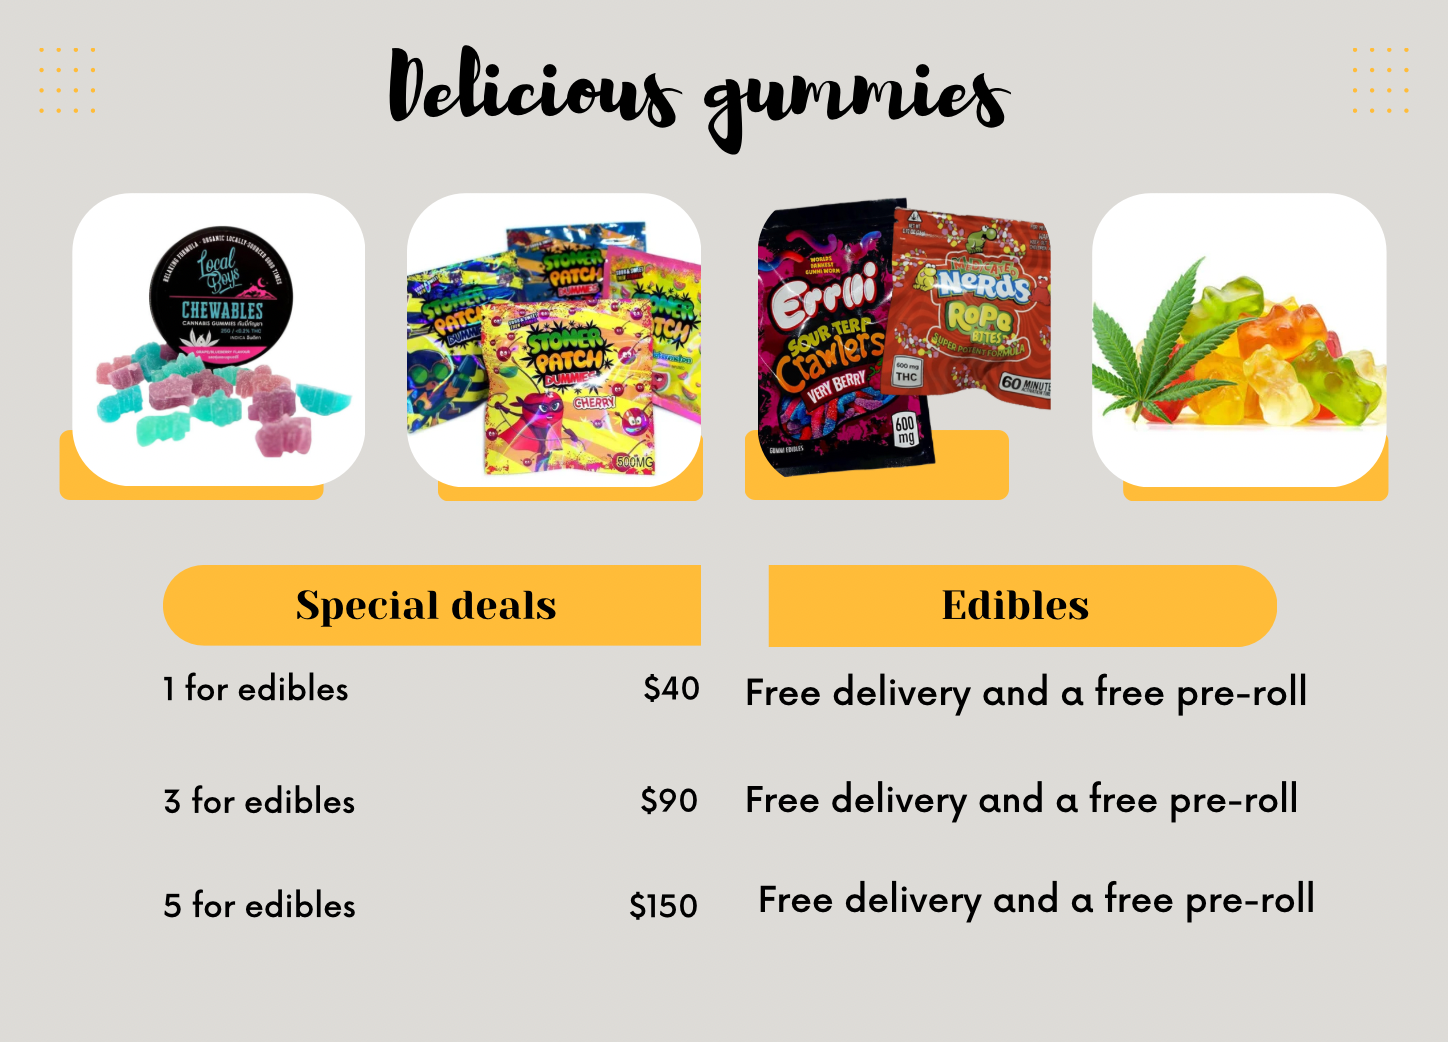 5 Edibles for $150